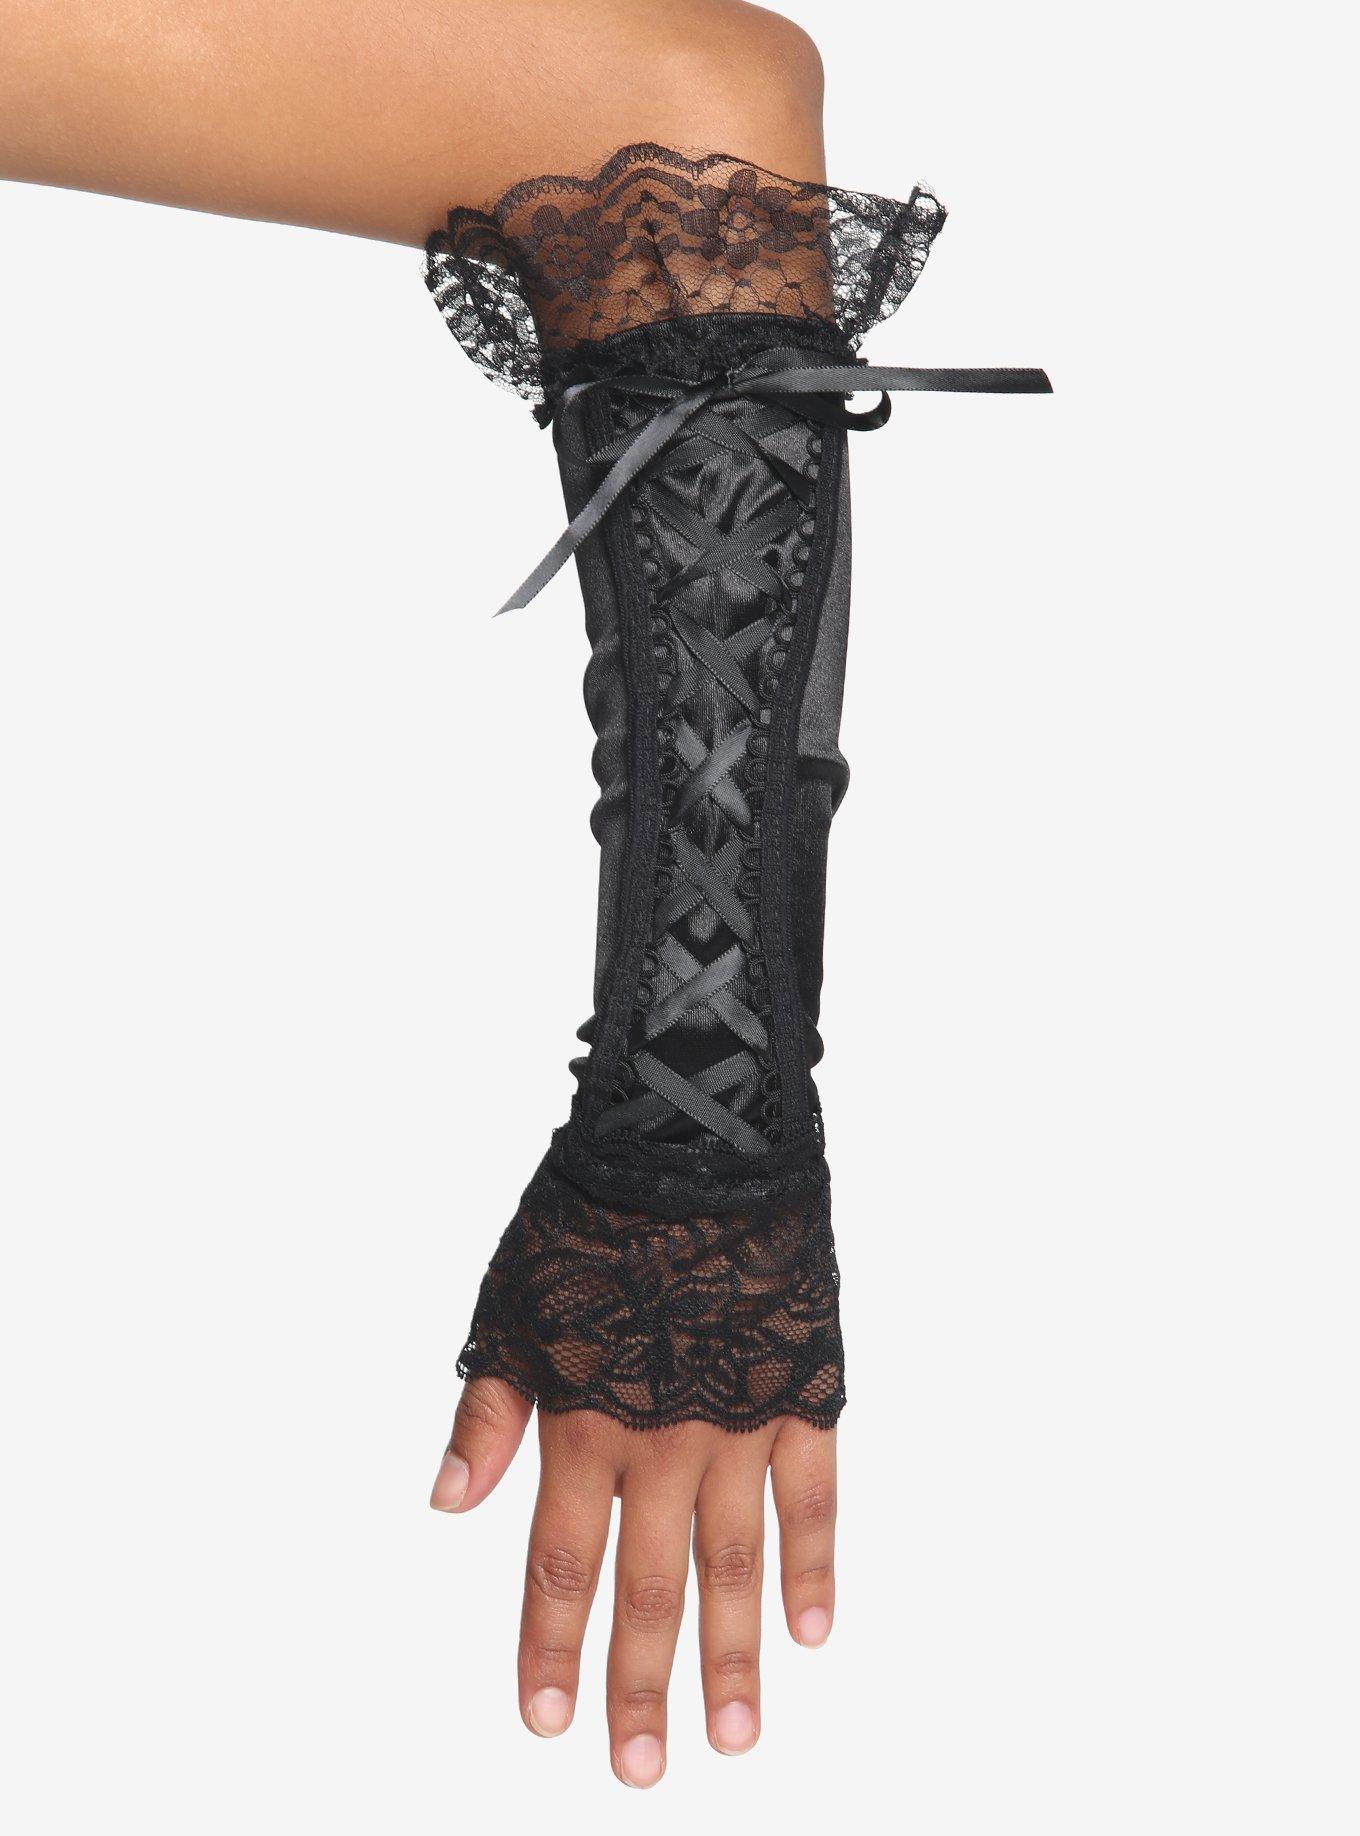 Black Ruffle Lace-Up Arm Warmers, , alternate